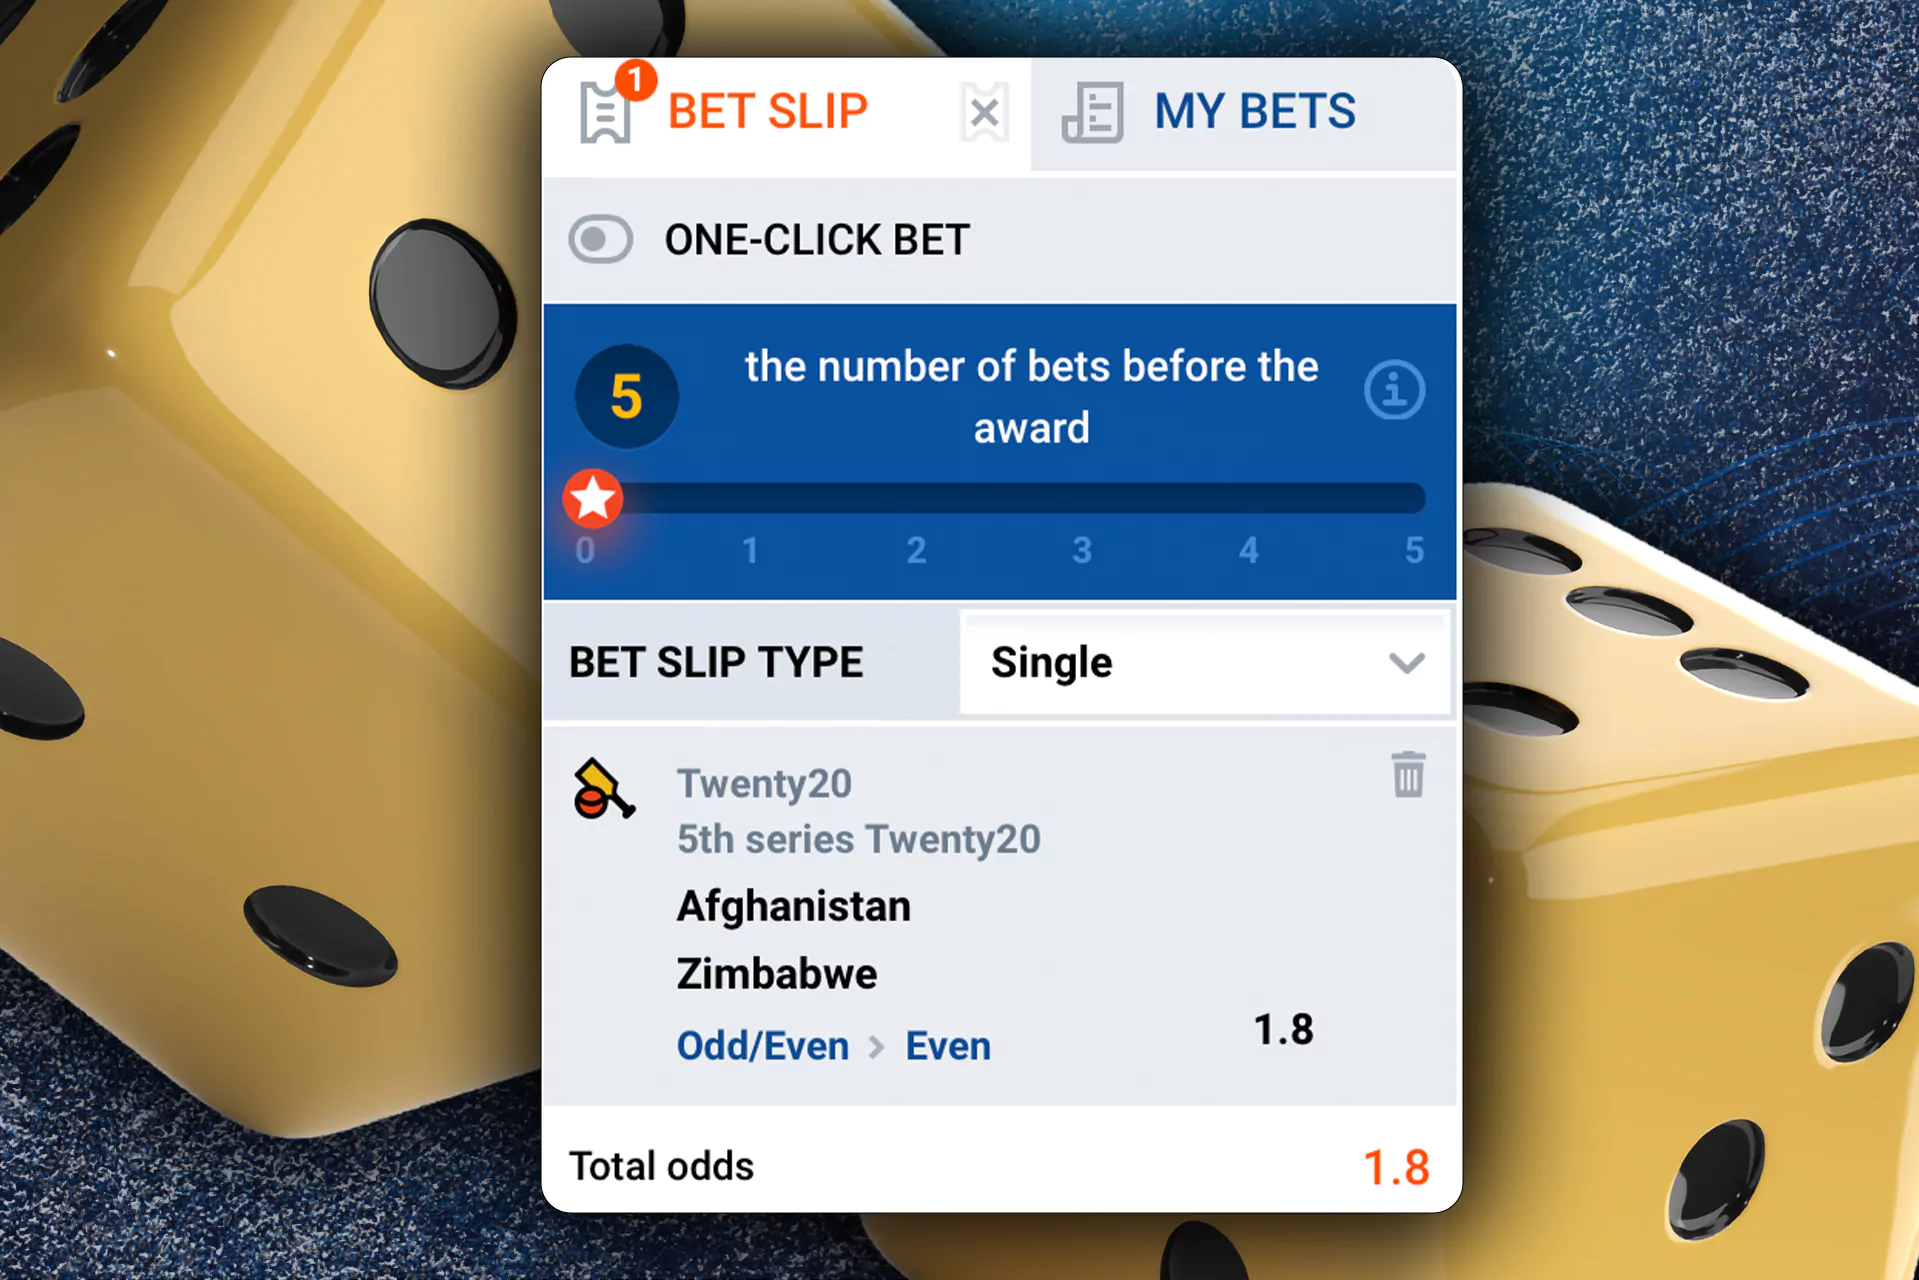 Types of bets: single, bet slip, my bets.